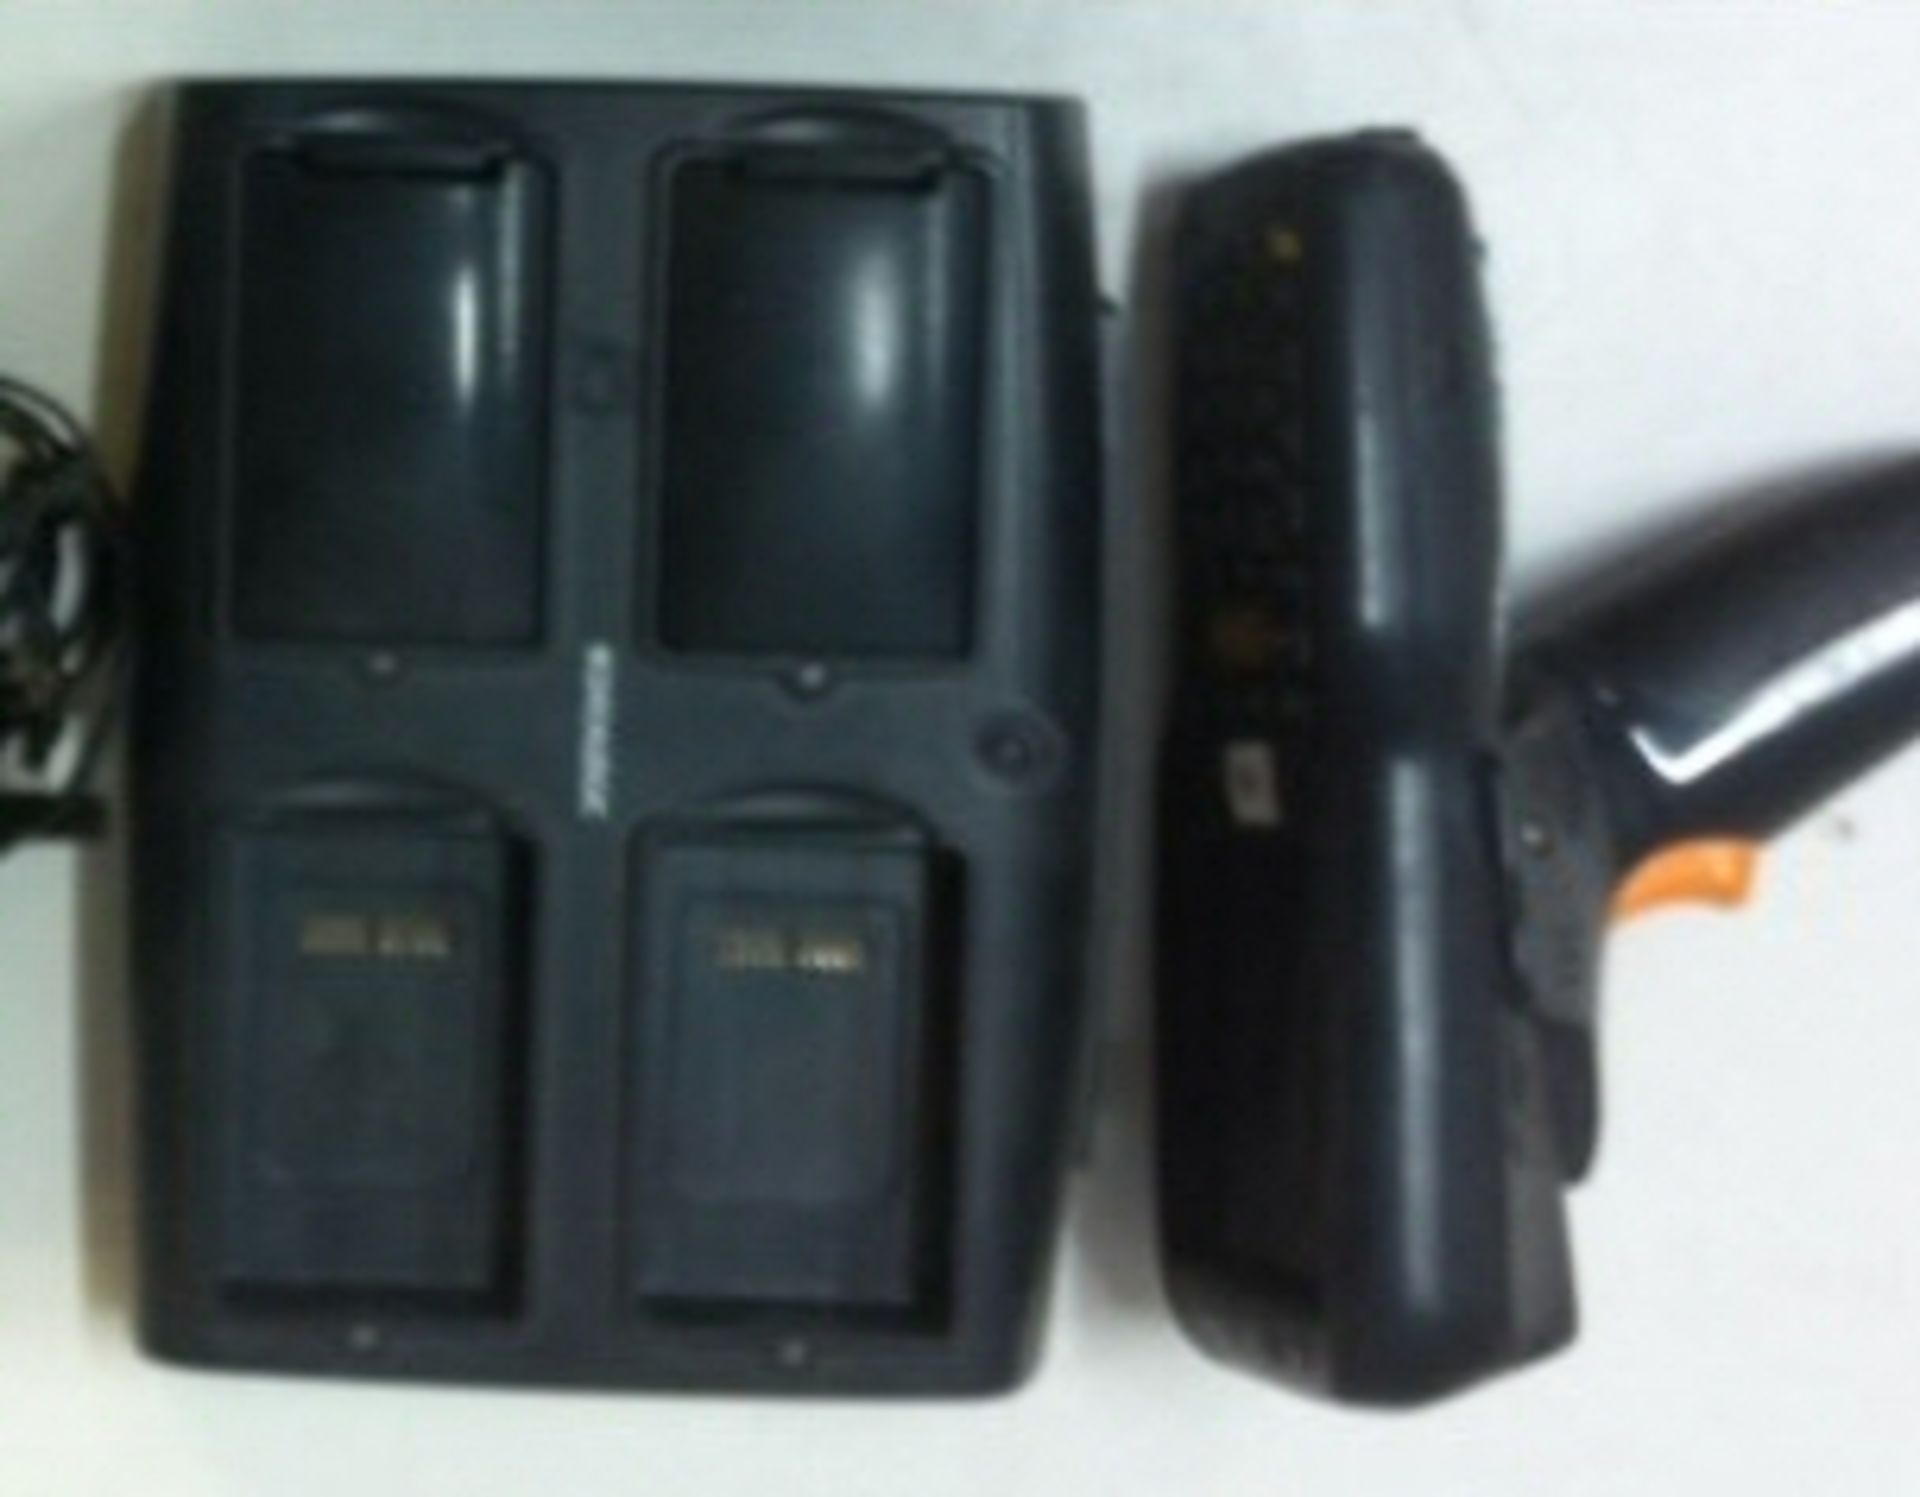 6 x Datalogic Skorpio-G barcode scanners with charger